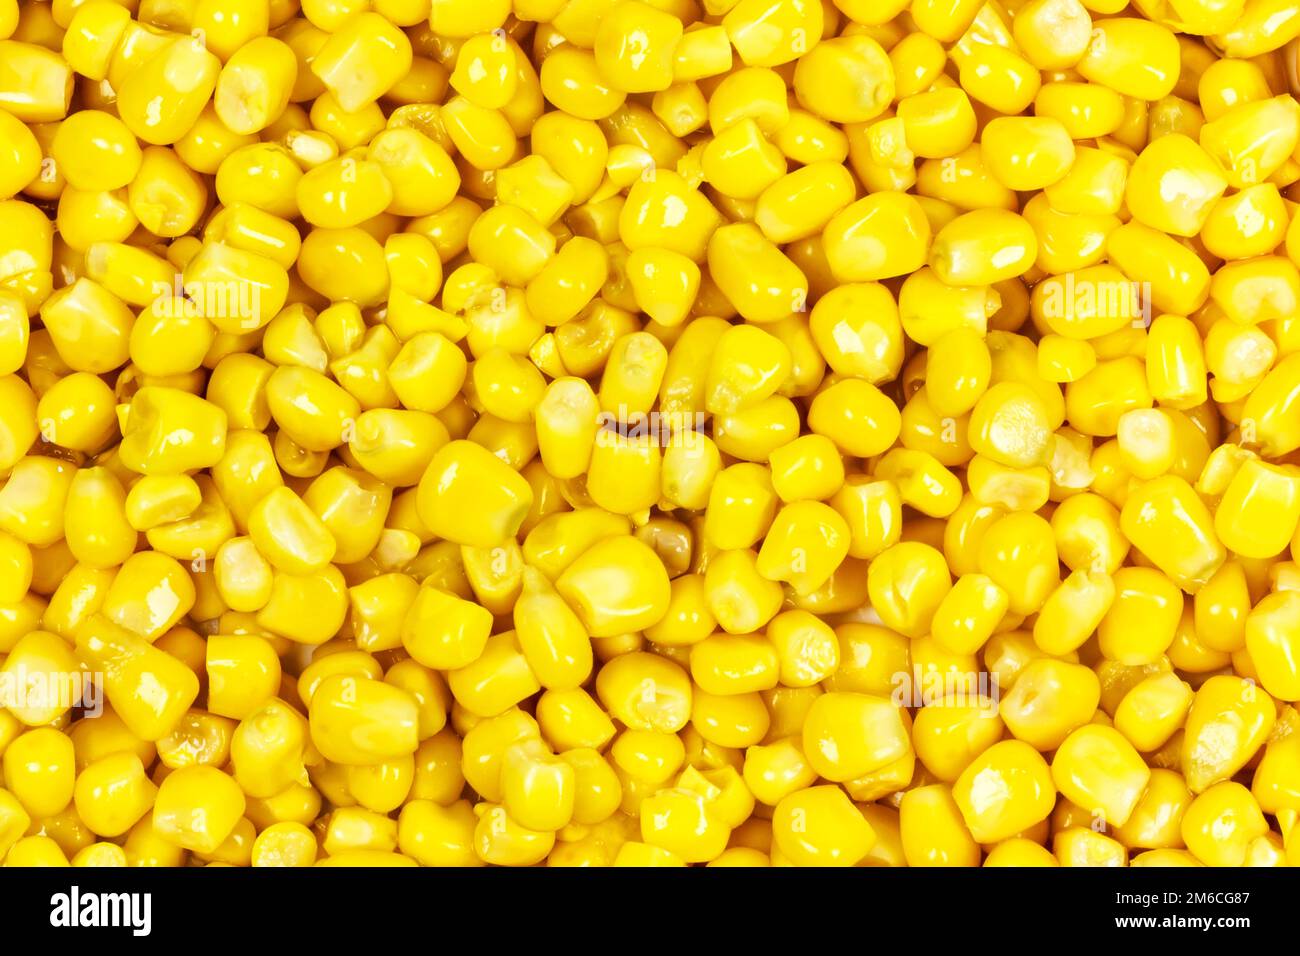 Corn kernels close-UPS on the entire surface of the image Stock Photo